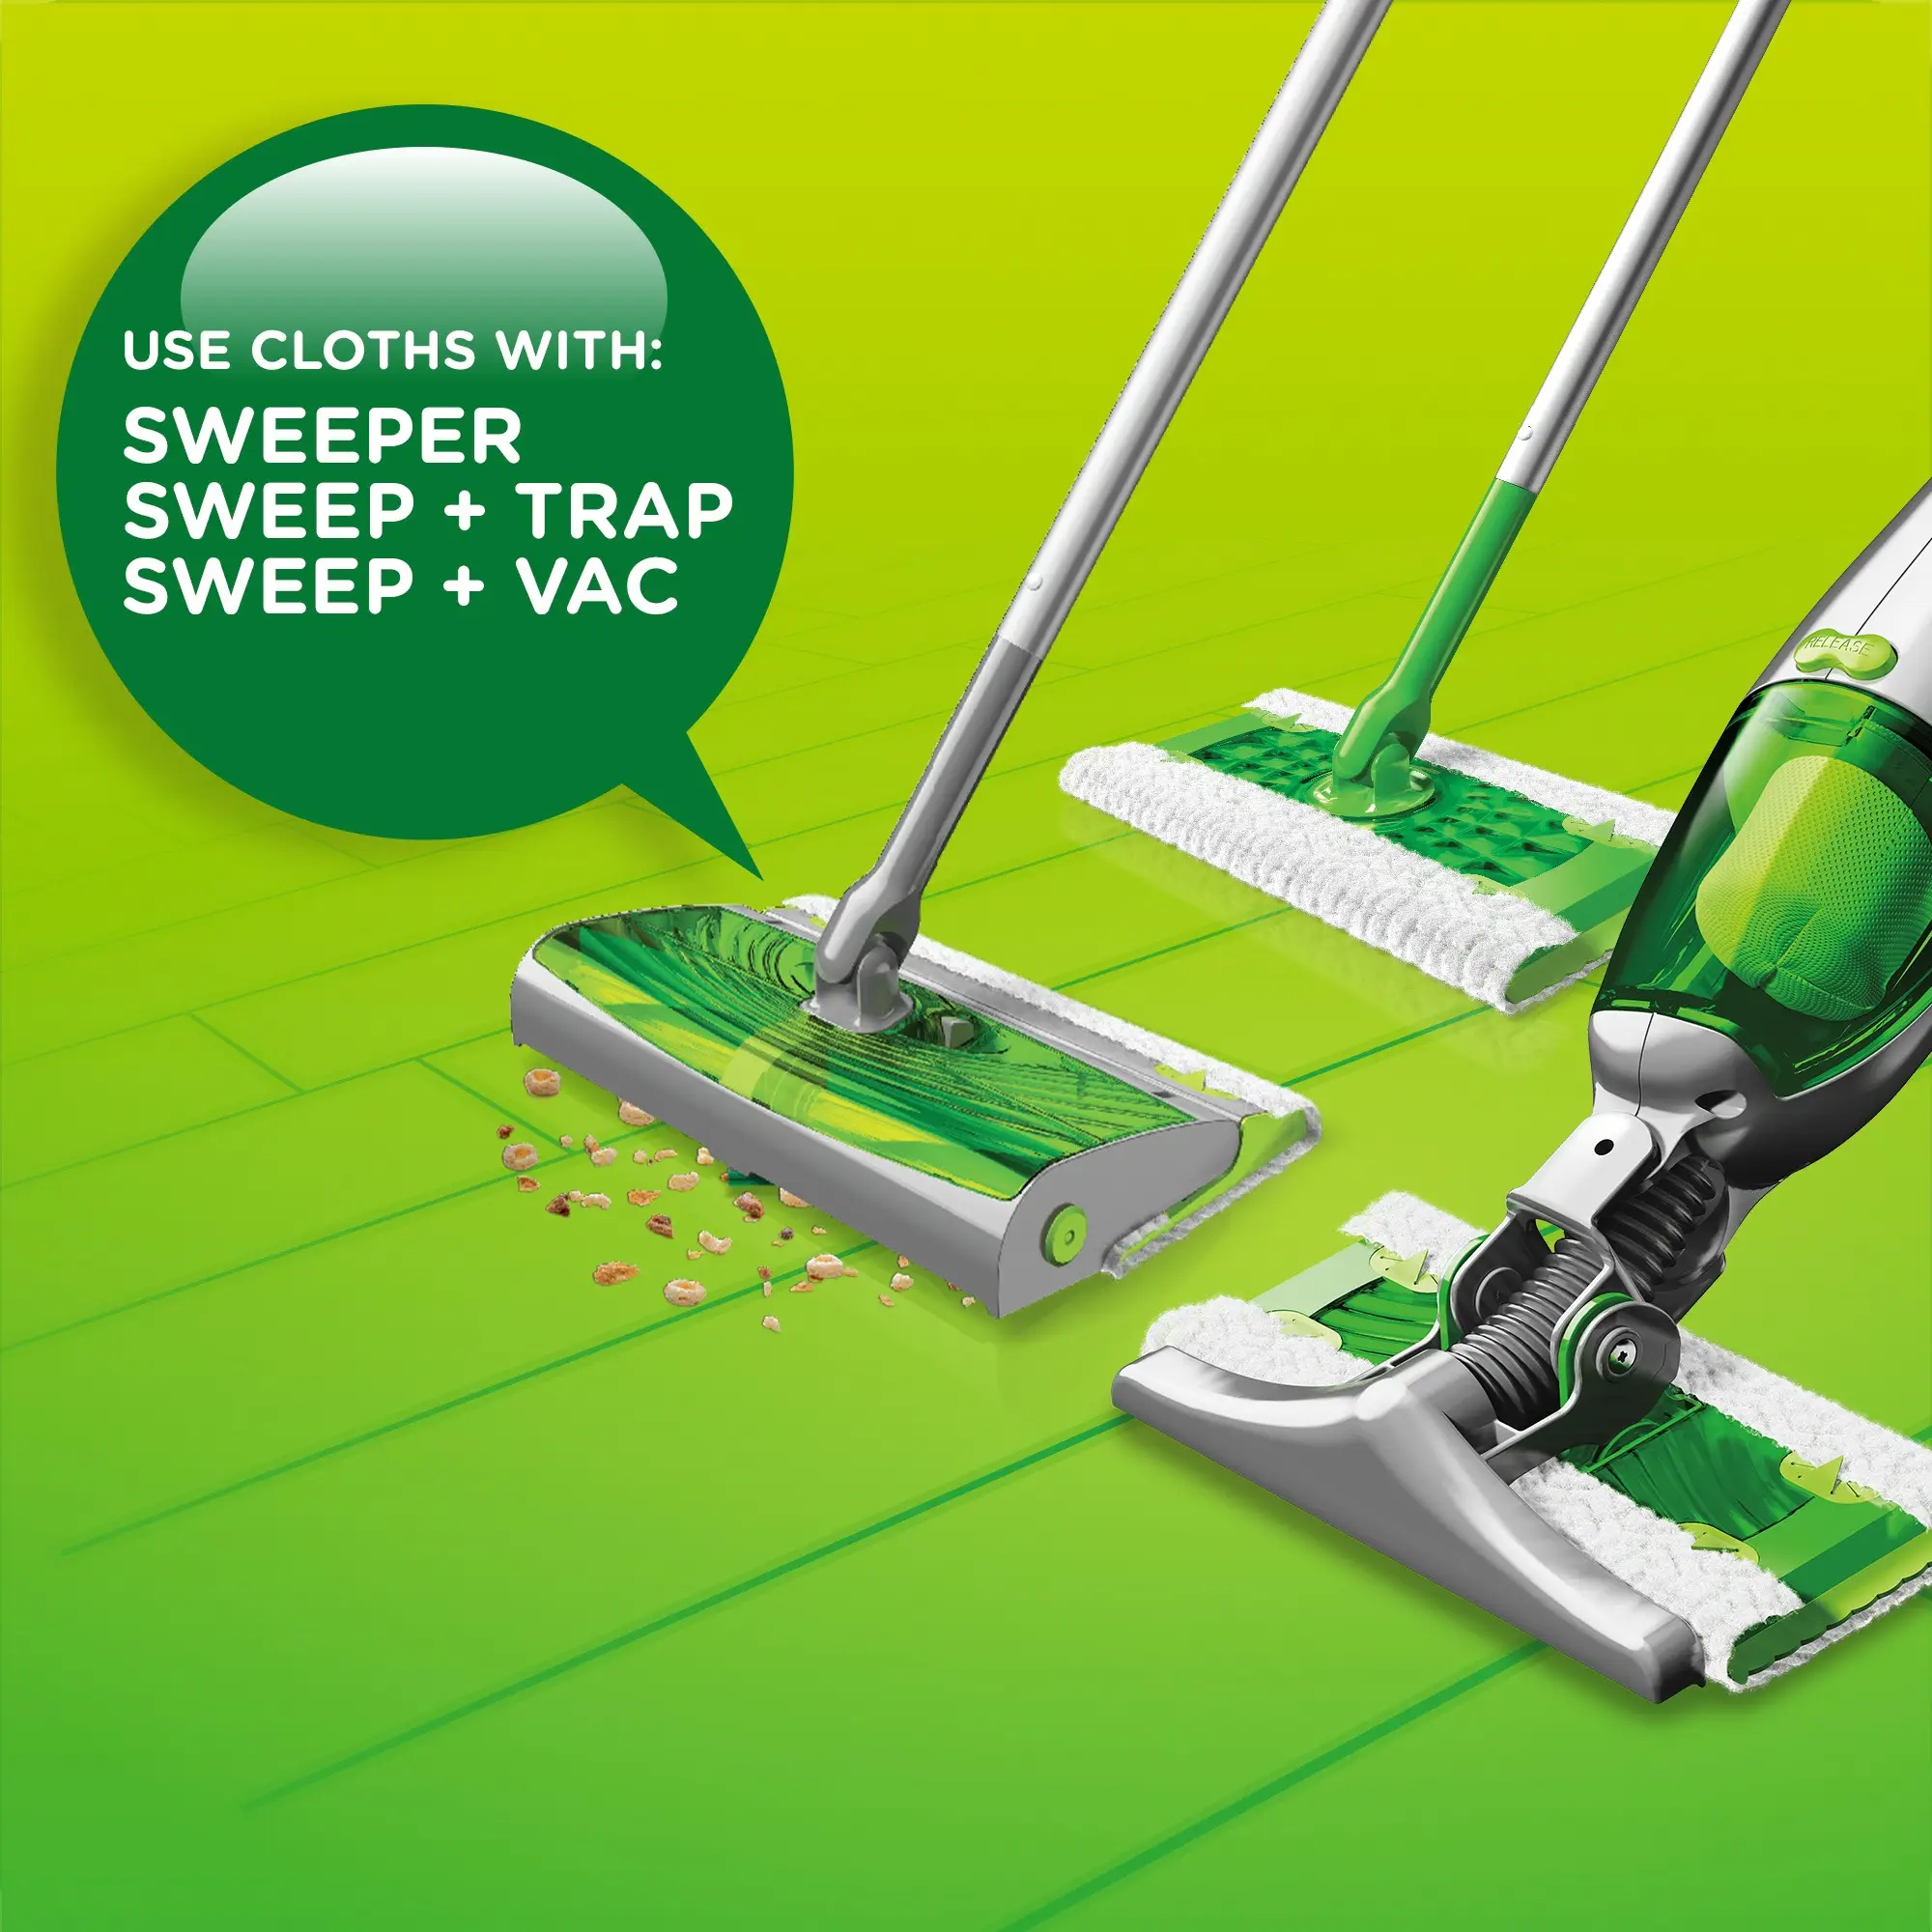 Swiffer Dry Sweeping Cloth Refills – Pack of 16